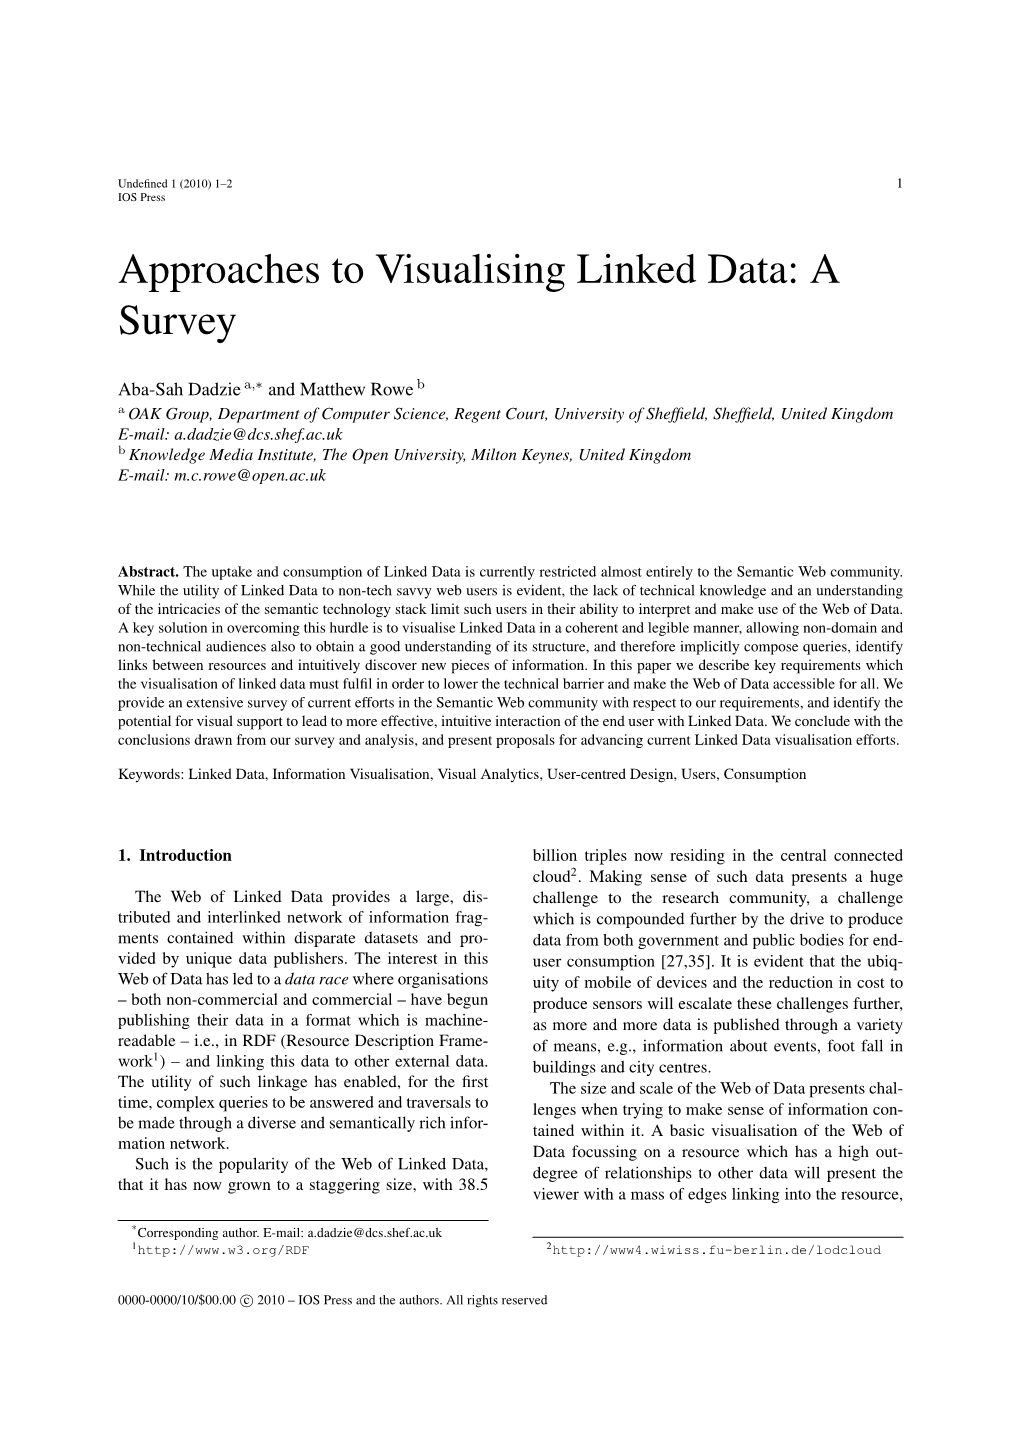 Approaches to Visualising Linked Data: a Survey